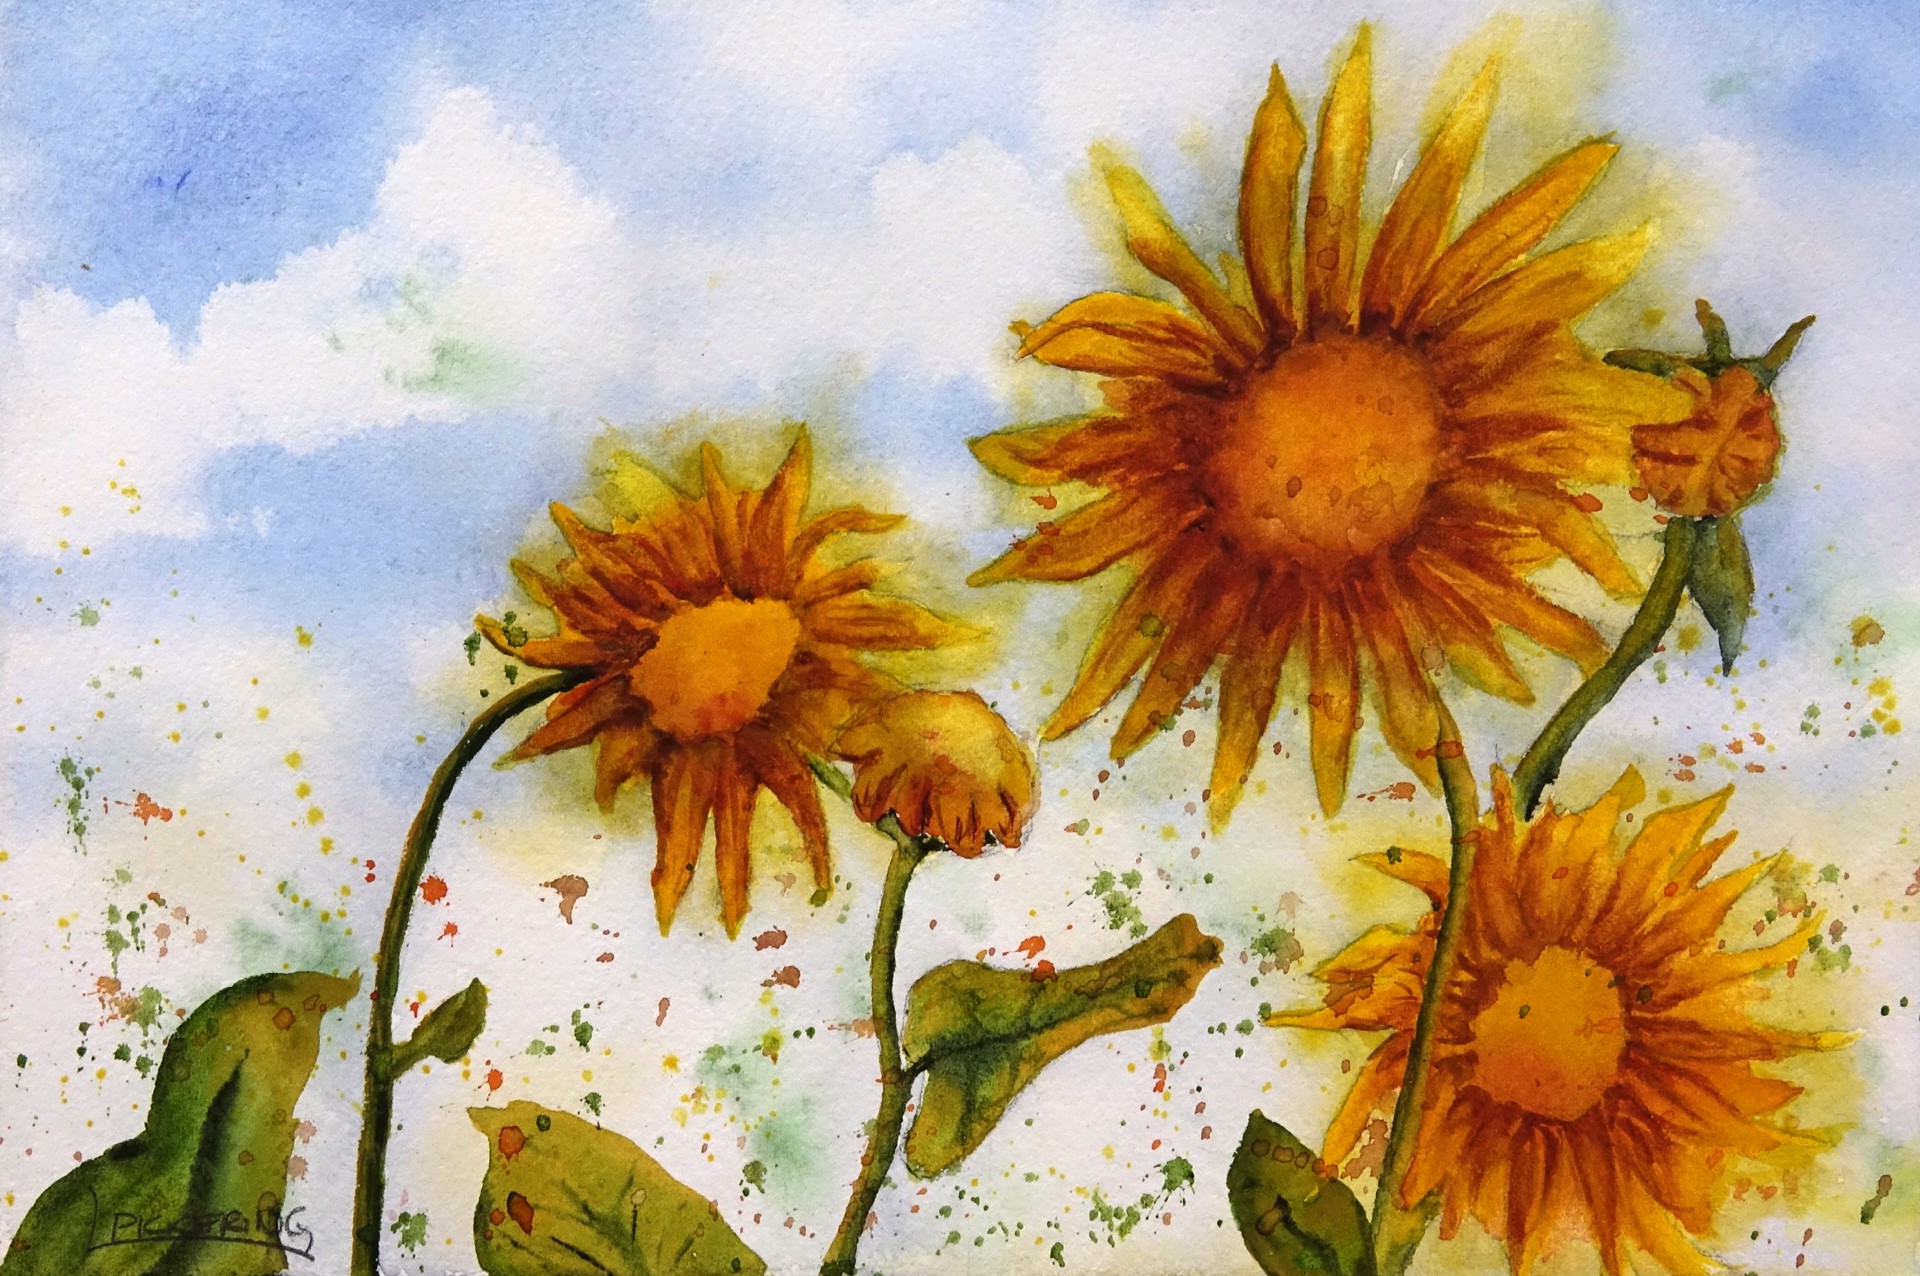 It's a Sunny Day by Laura Pickering